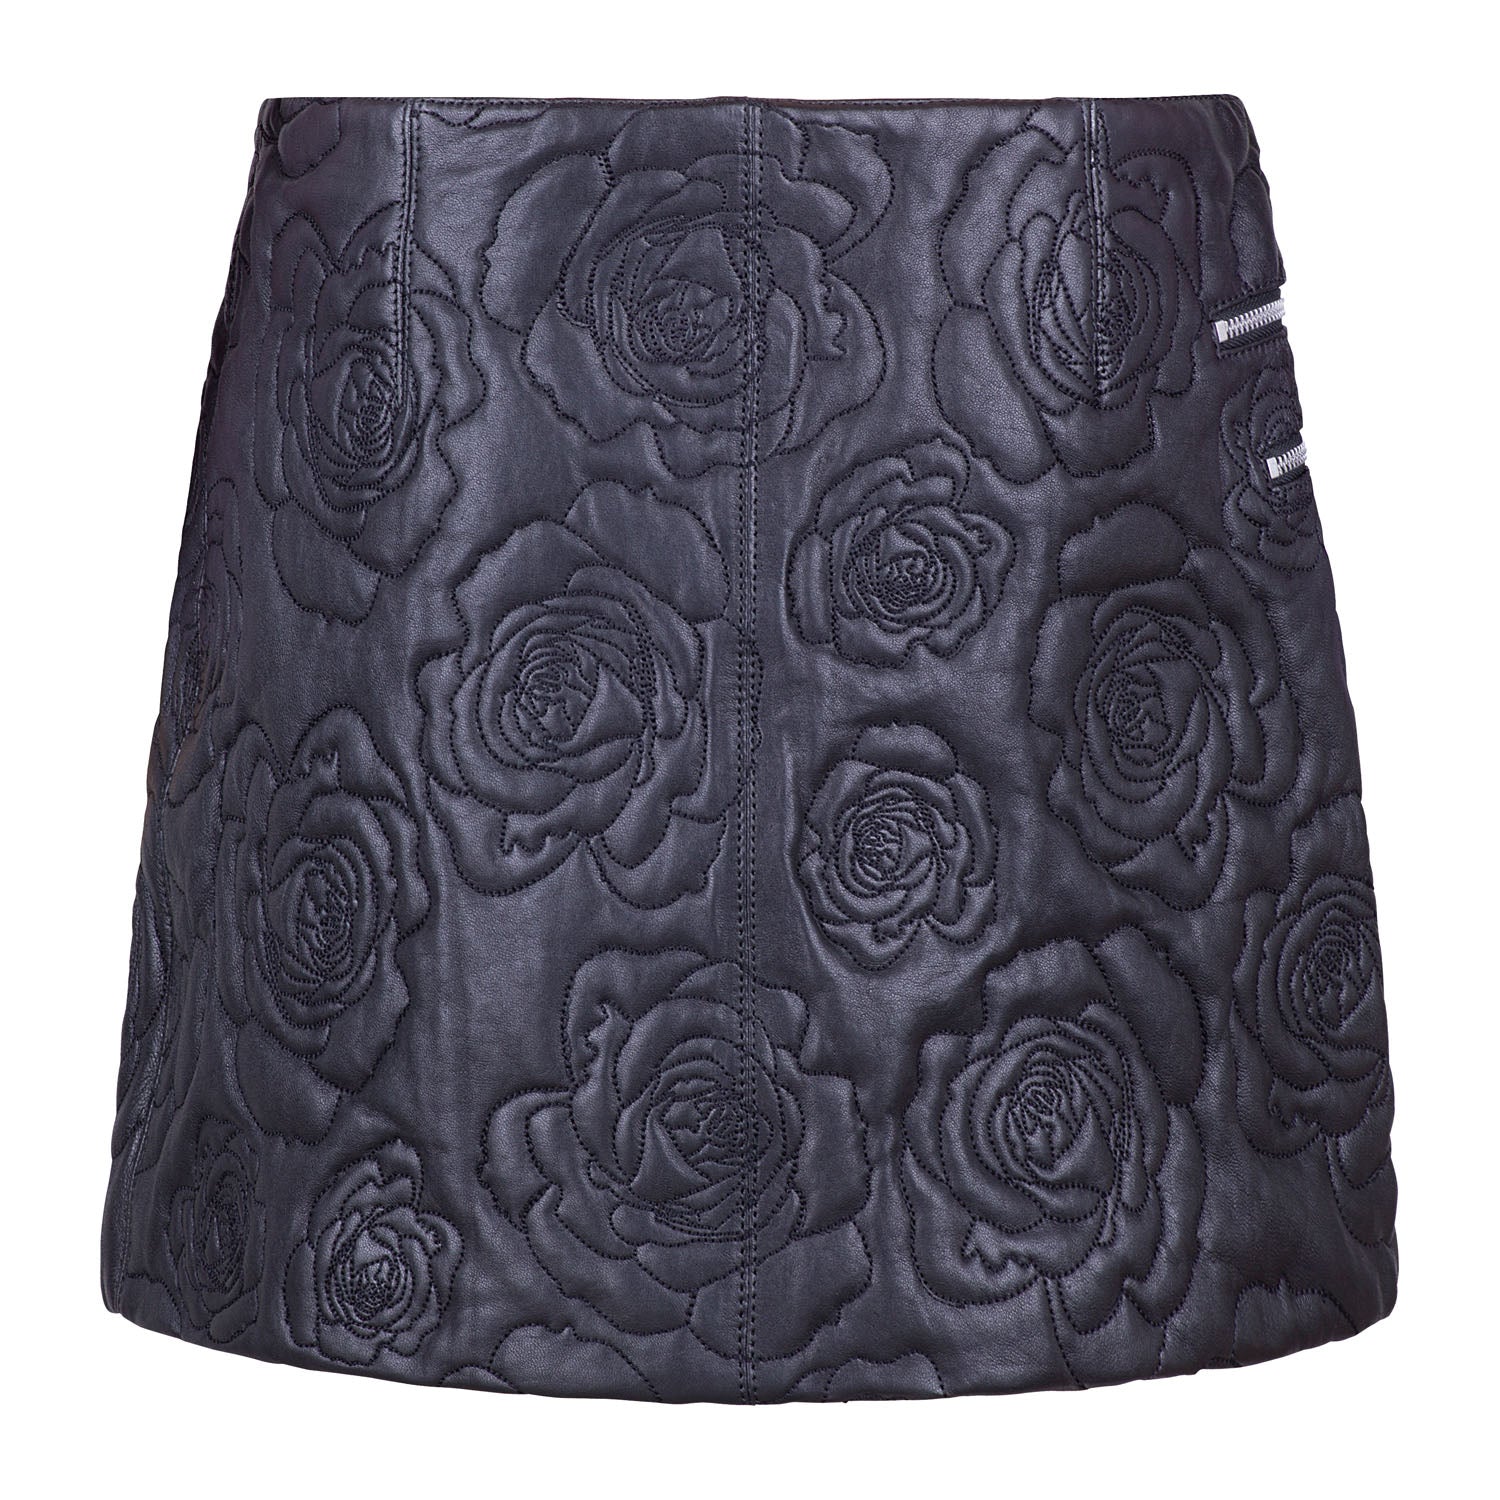 Roses In Silver Vases Embroidered Leather Skirt Back